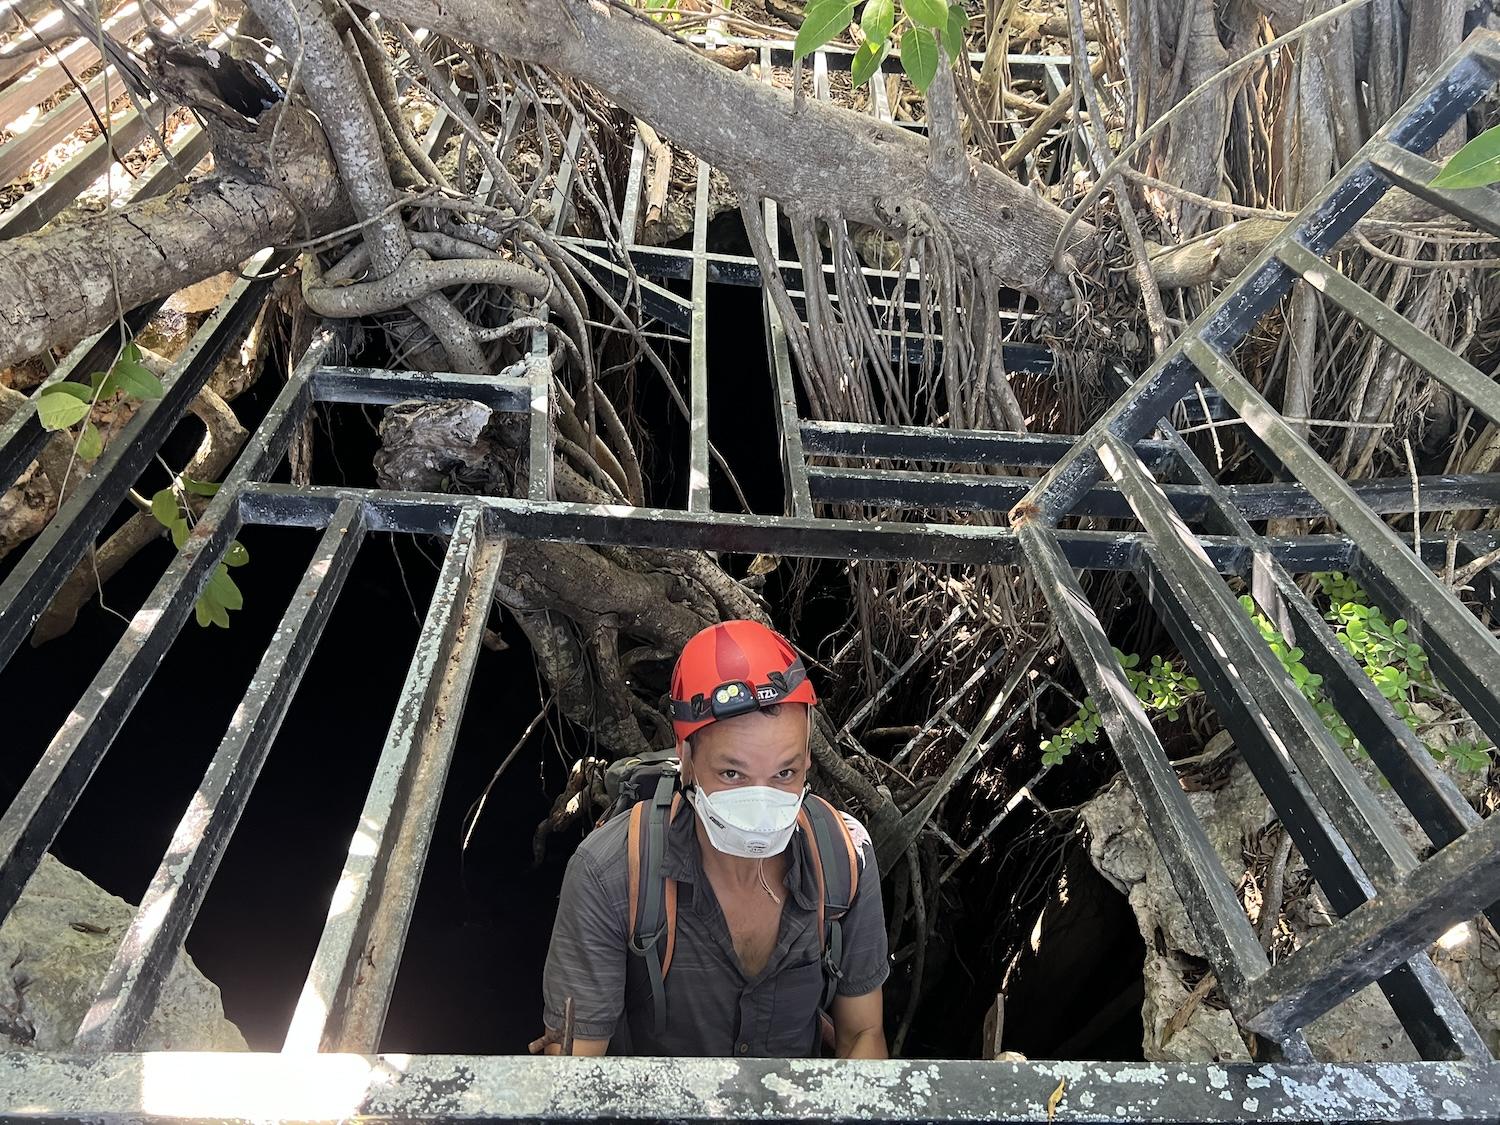 The cave at Fountain Cavern National Park in Anguilla is currently closed, but bat expert Baptiste Angin from Guadeloupe enters it while visiting the Anguilla National Trust to do research.